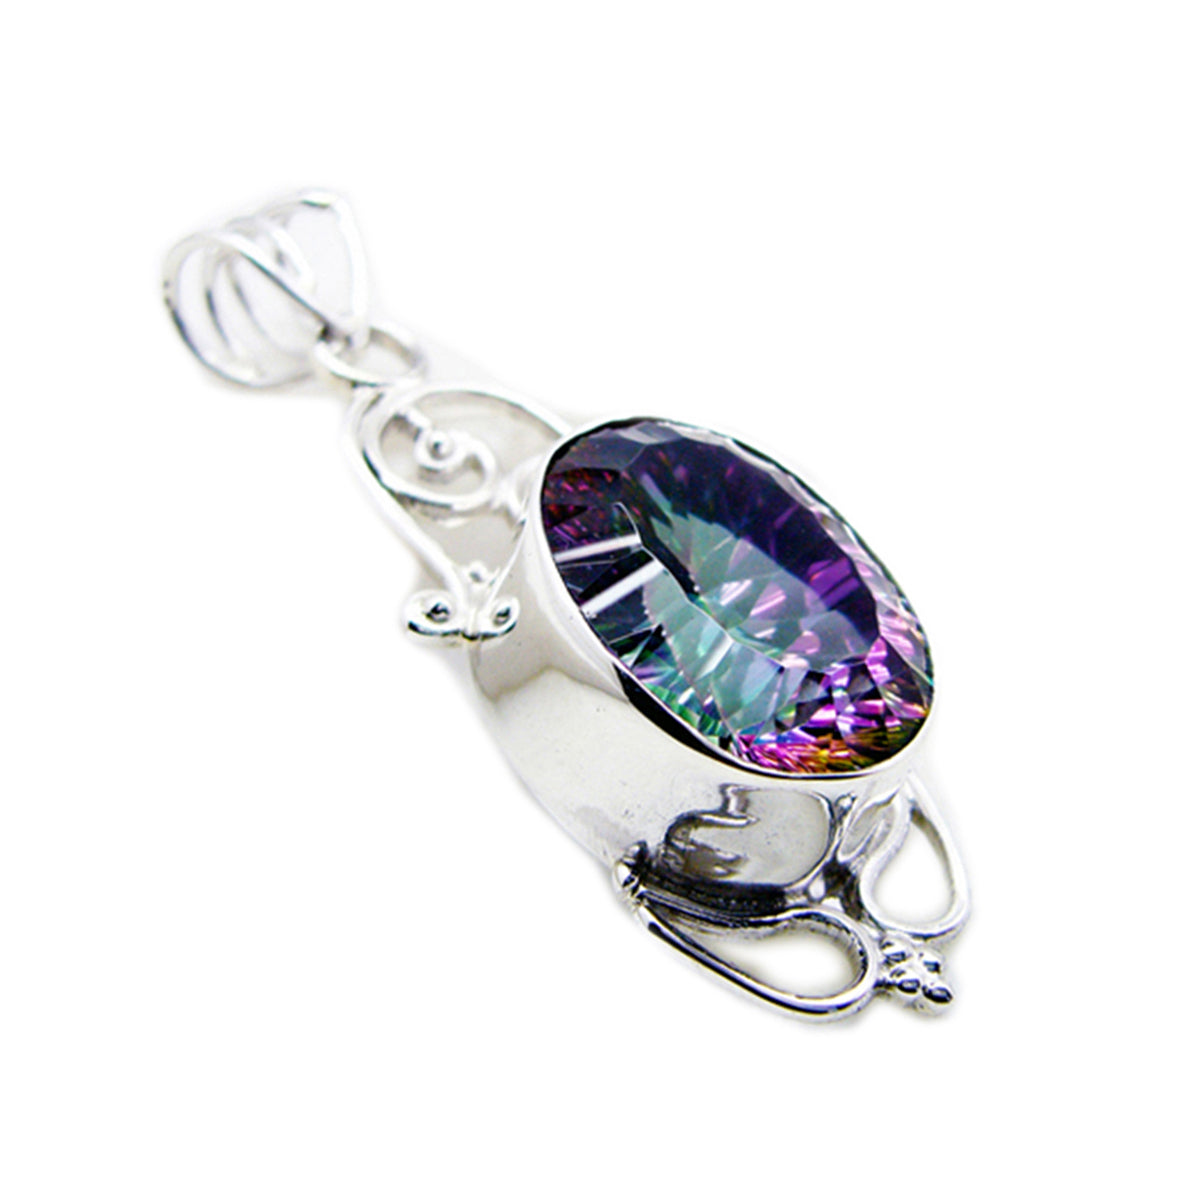 Riyo Graceful Gems Oval Faceted Multi Color Mystic Quartz Solid Silver Pendant Gift For Easter Sunday